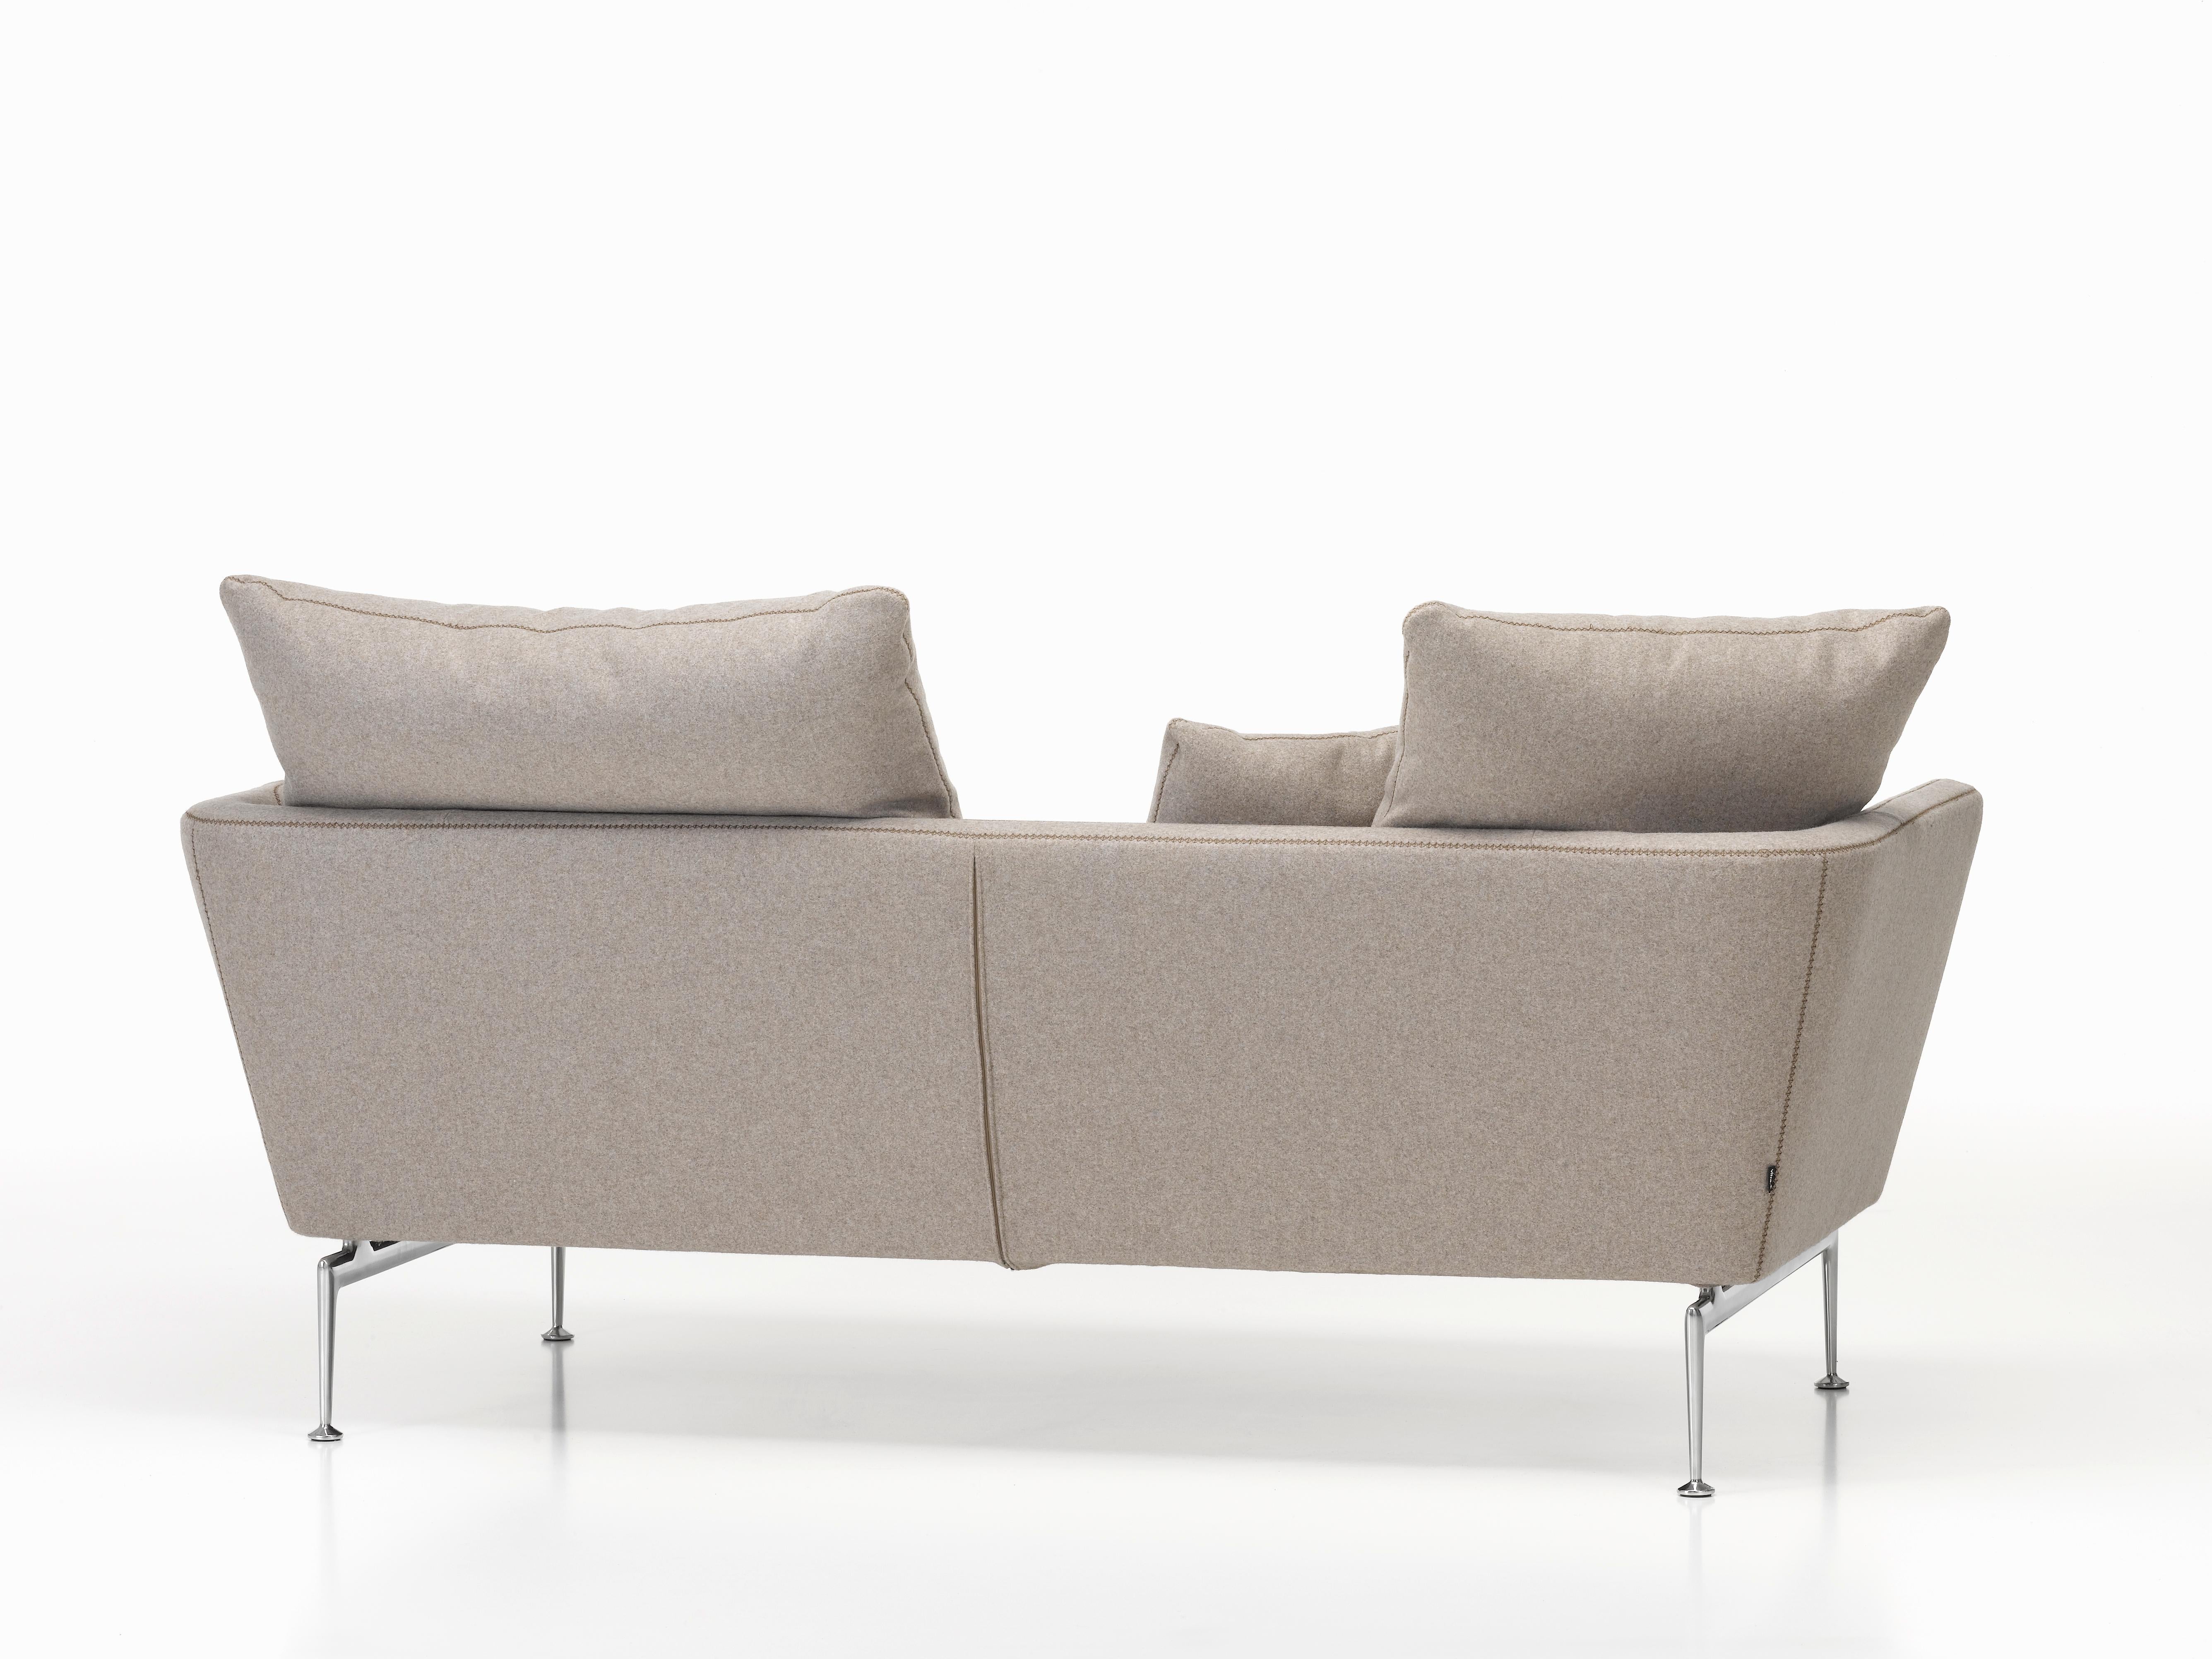 These items are currently only available in the United States.

The Suita sofa system combines light and slender volumes with an Industrial and technological aesthetic. The geometrically precise body and cushions seem to float above the sleek,